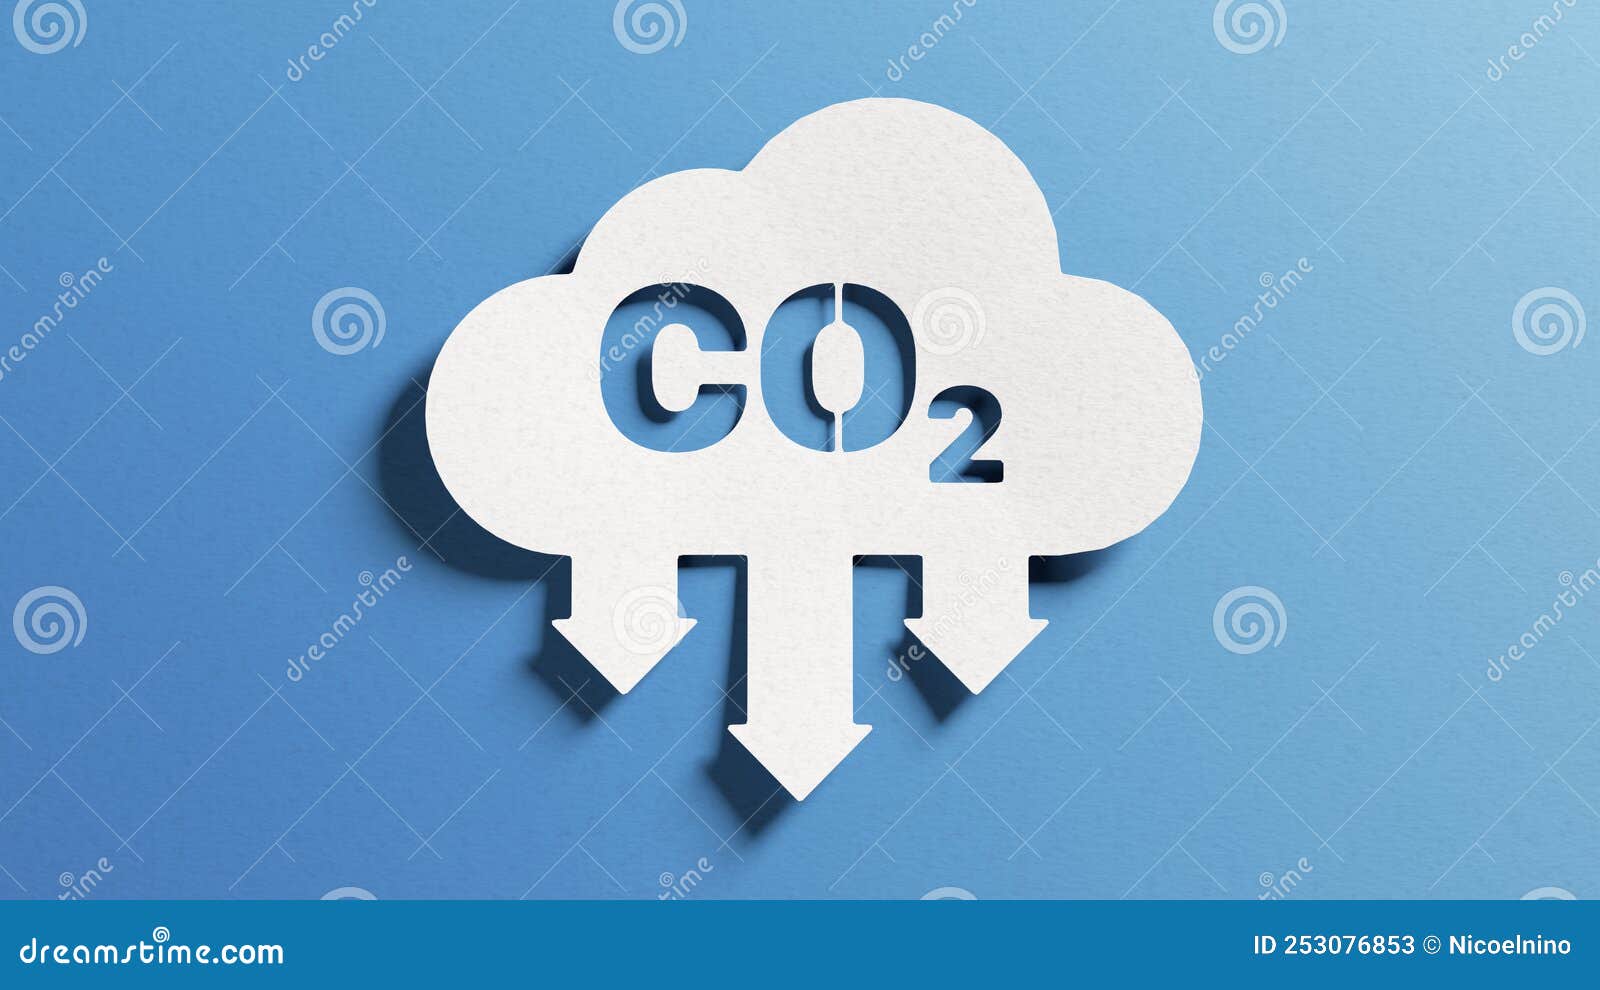 lower co2 emissions to limit climate change and global warming. reduce greenhouse gas levels, decarbonize, net zero carbon dioxide